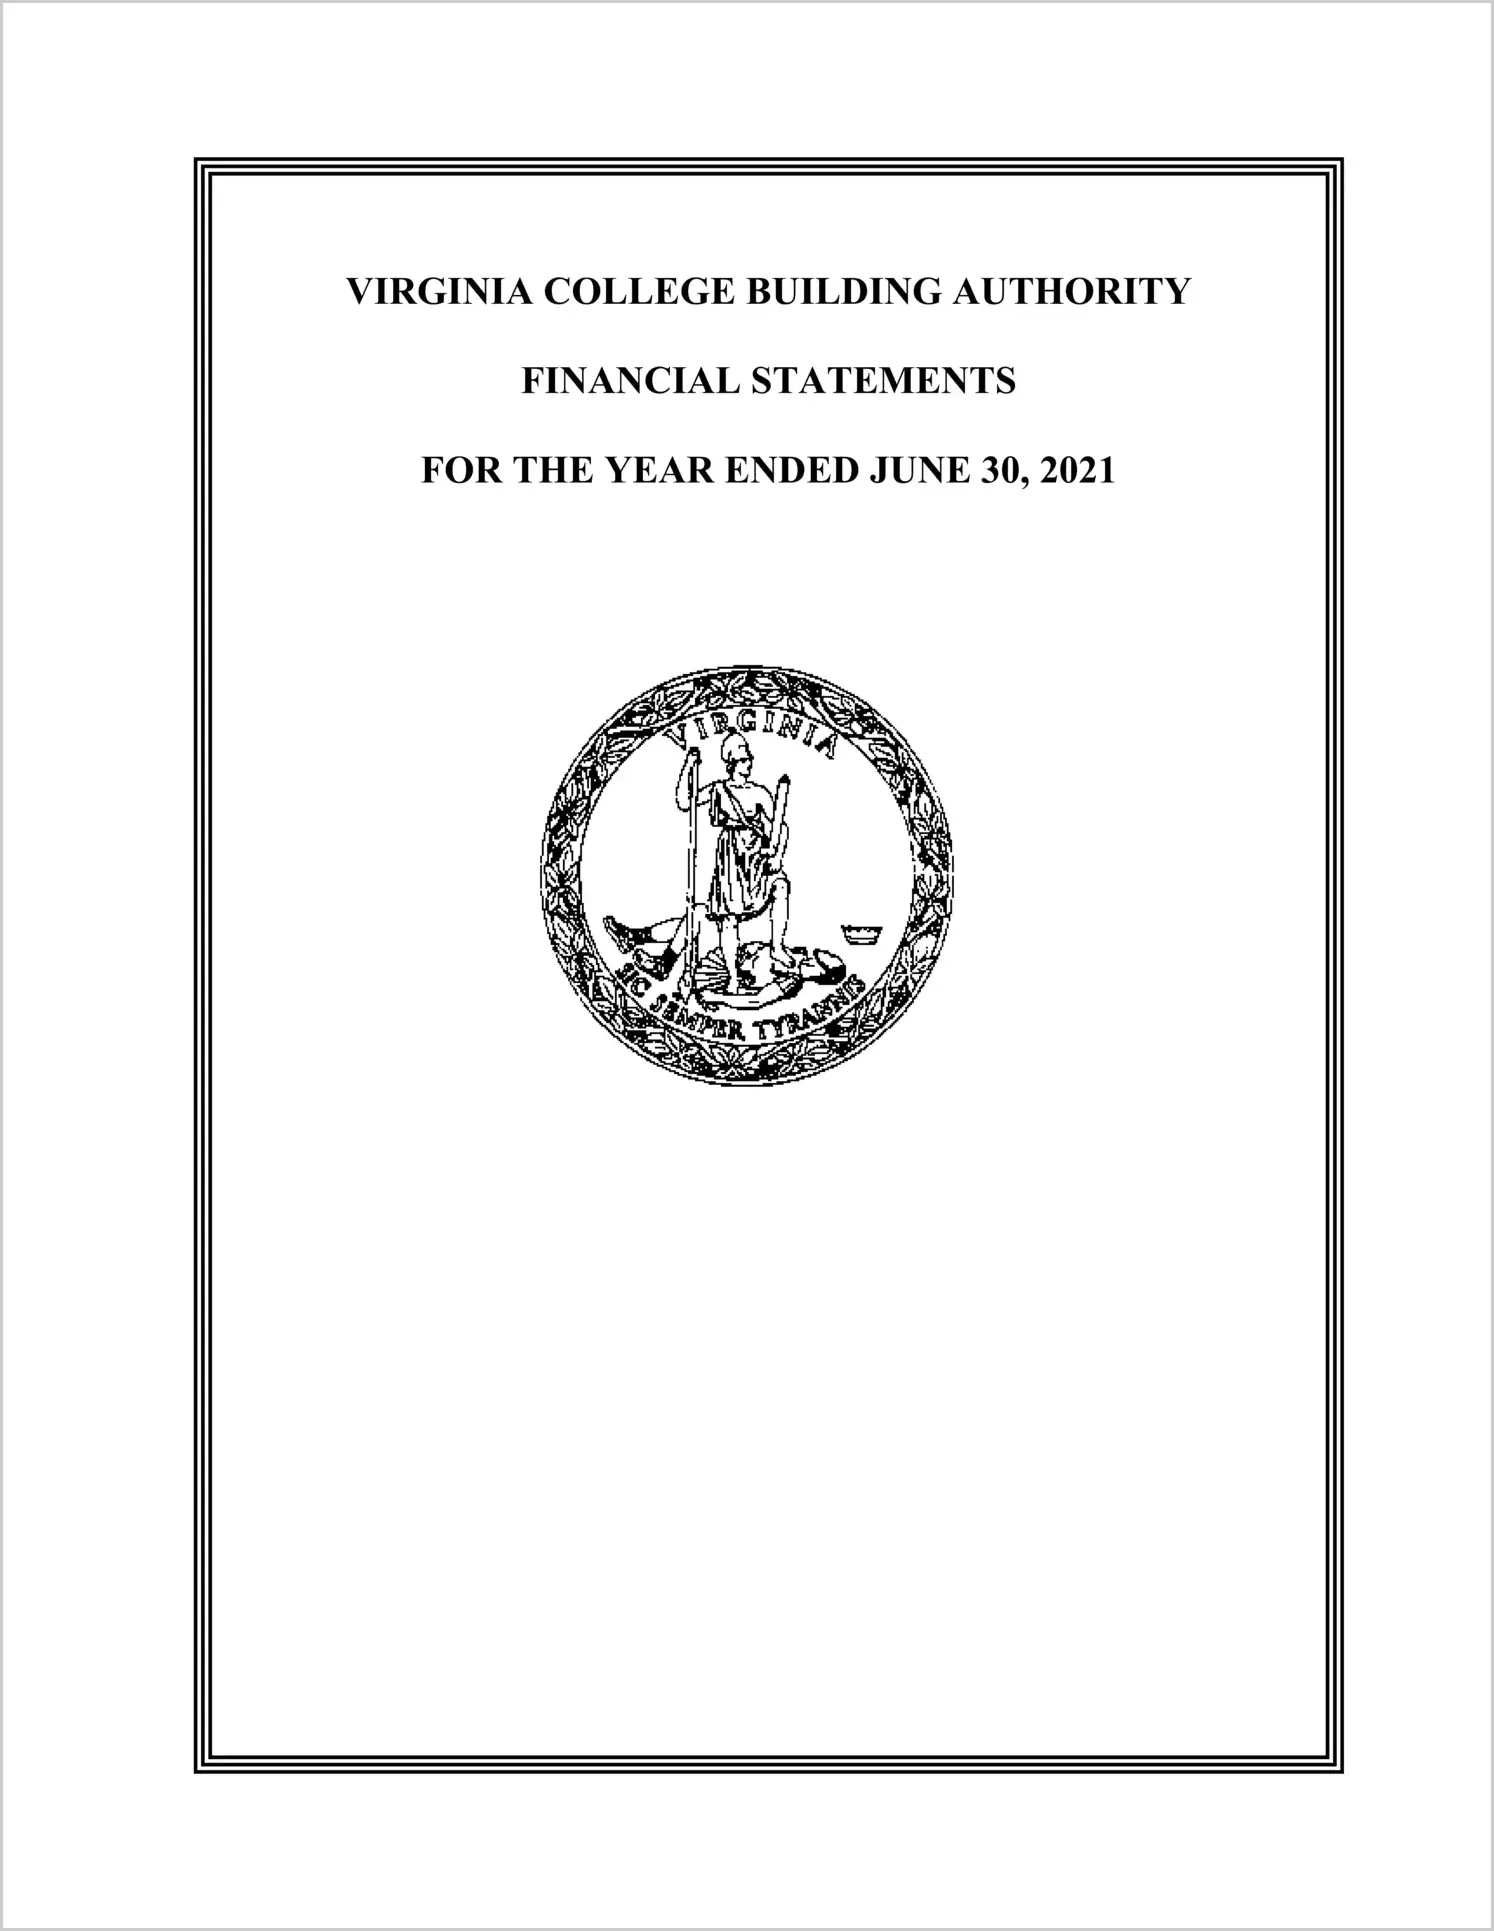 Virginia College Building Authority Financial Statements for the year ended June 30, 2021